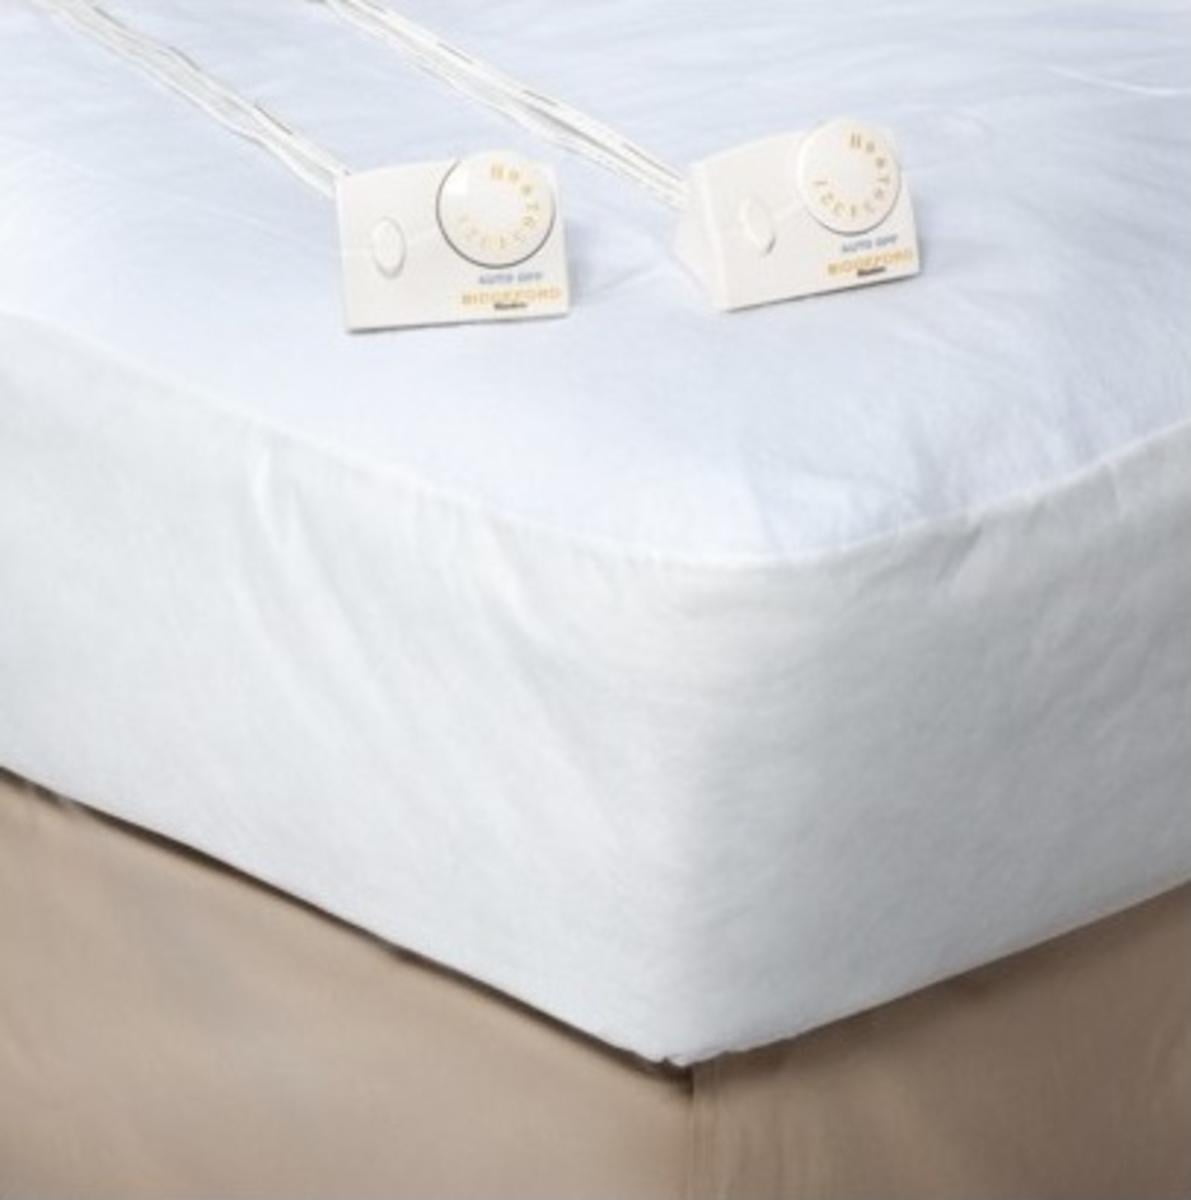 Details about   Biddeford FULL Size Electric Heated Mattress Pad Cover Cozy Warming Quilted Warm 